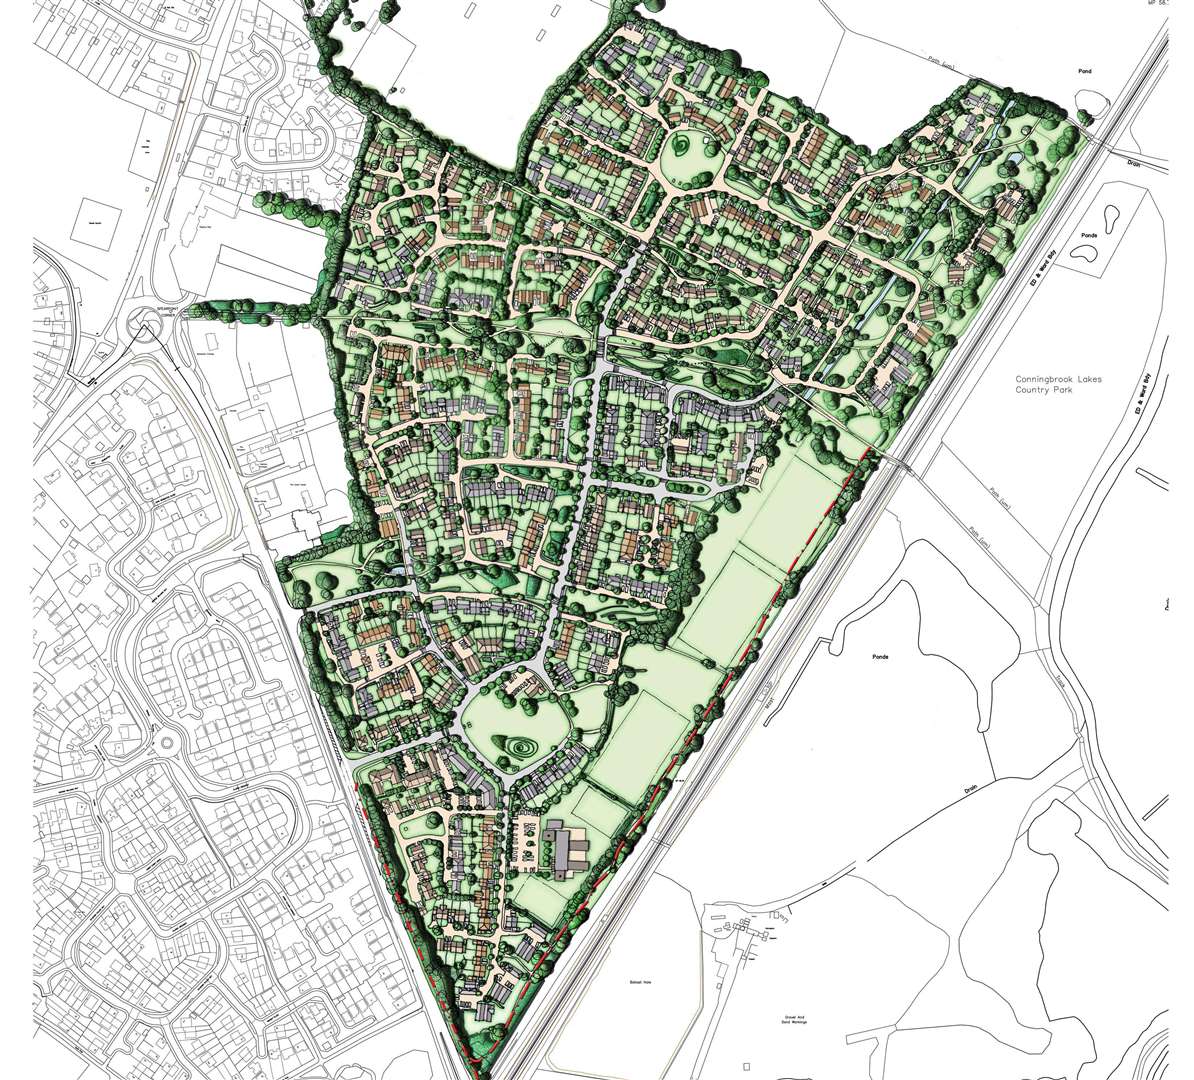 The initial masterplan for the Conningbrook Park scheme, shown here, has been overhauled following consultation.